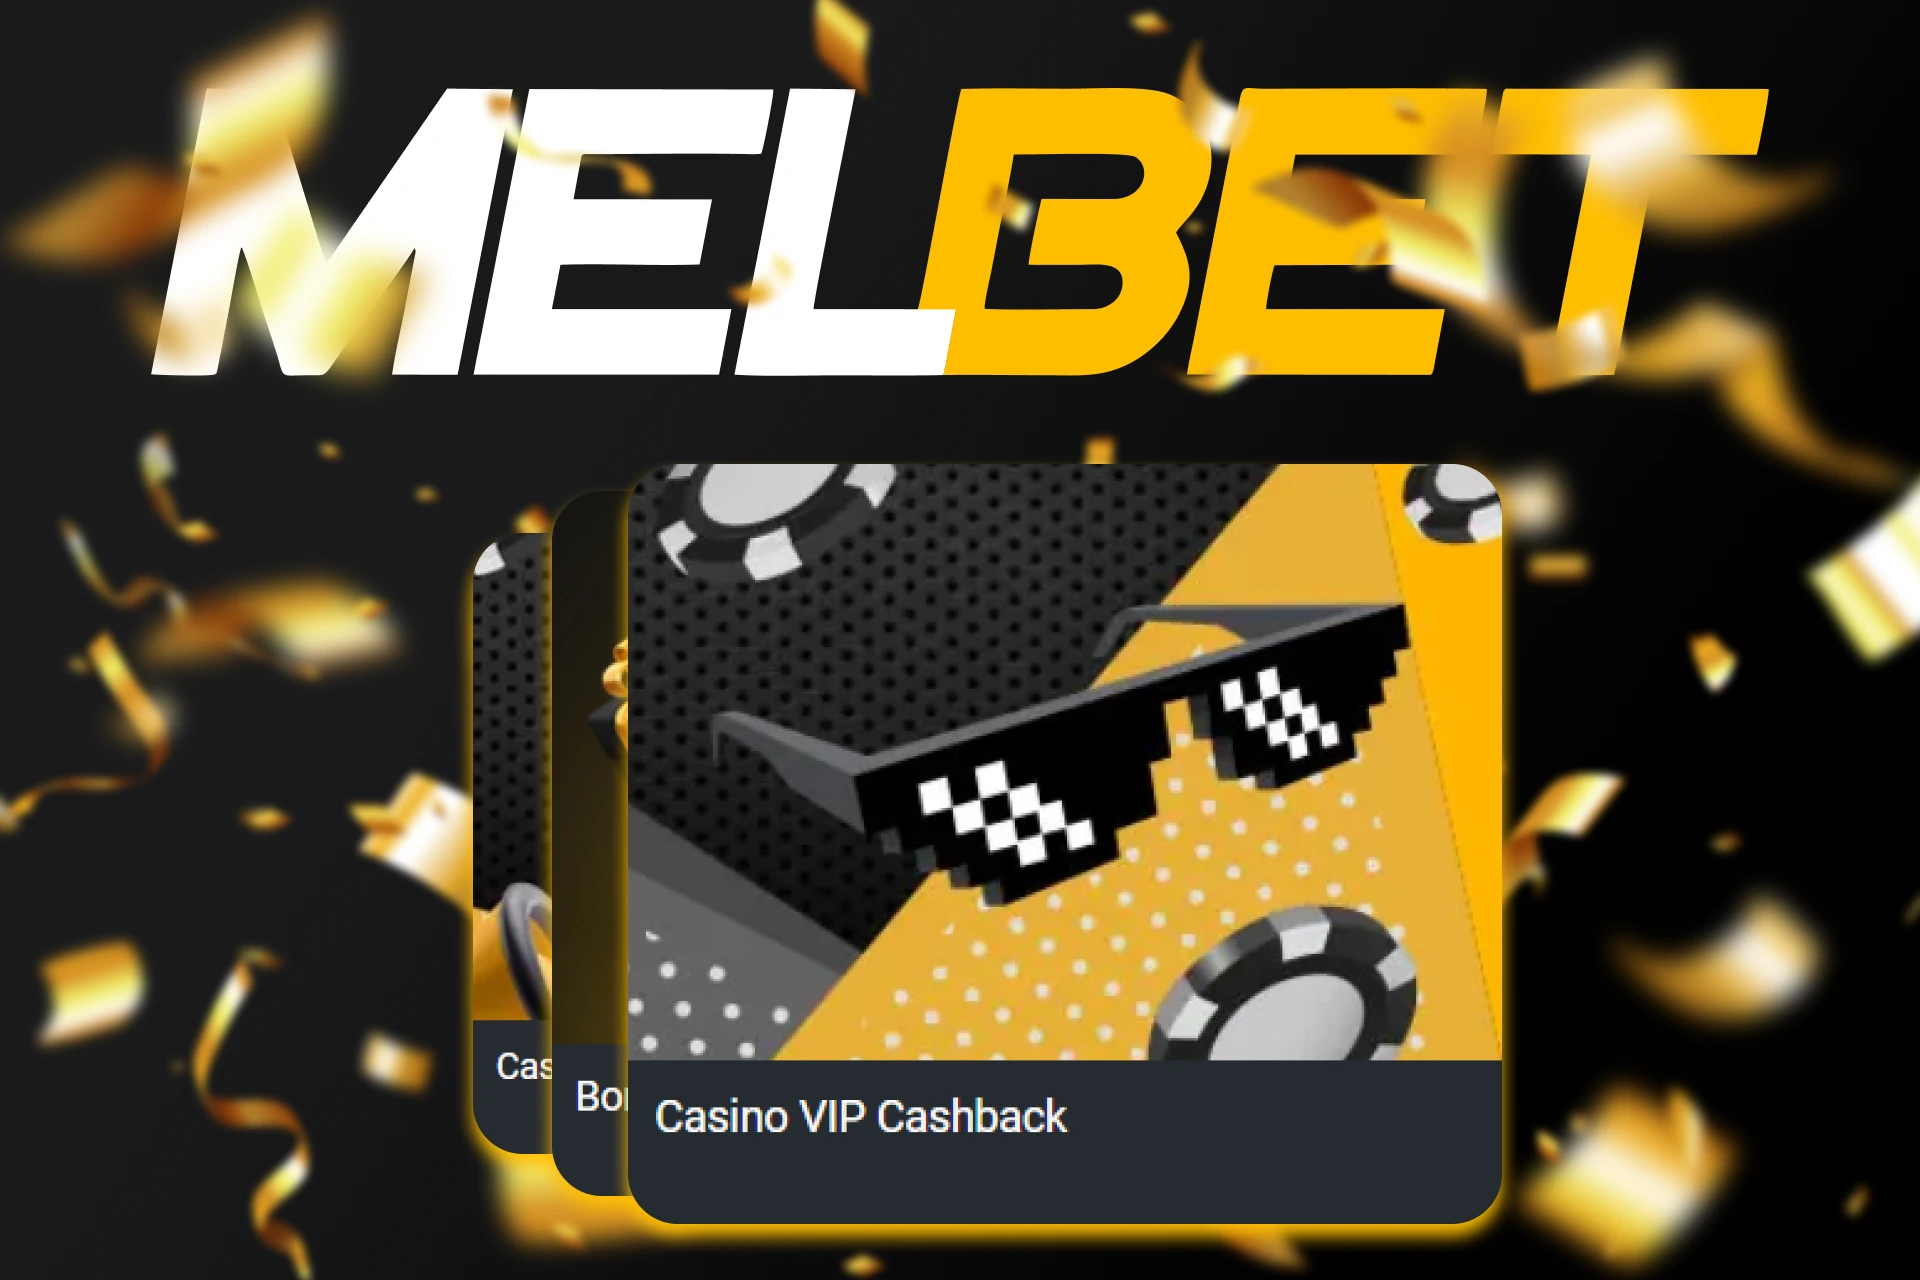 Join the loyalty program and receive Melbet cashback.